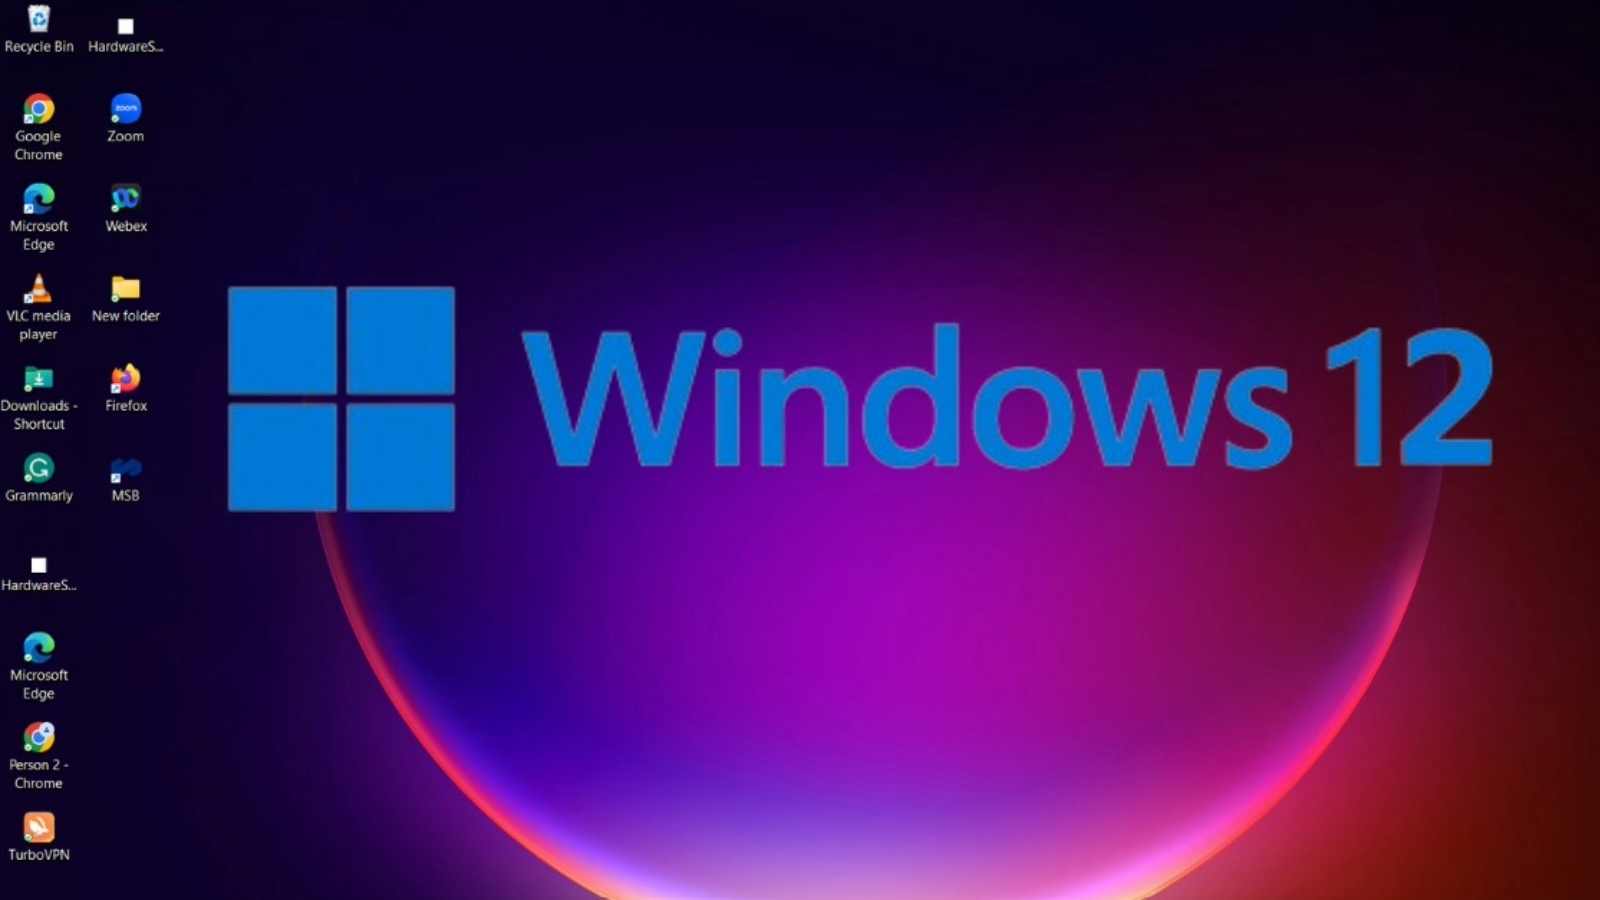 Windows 12: Leaks, features & requirements speculation - Dexerto